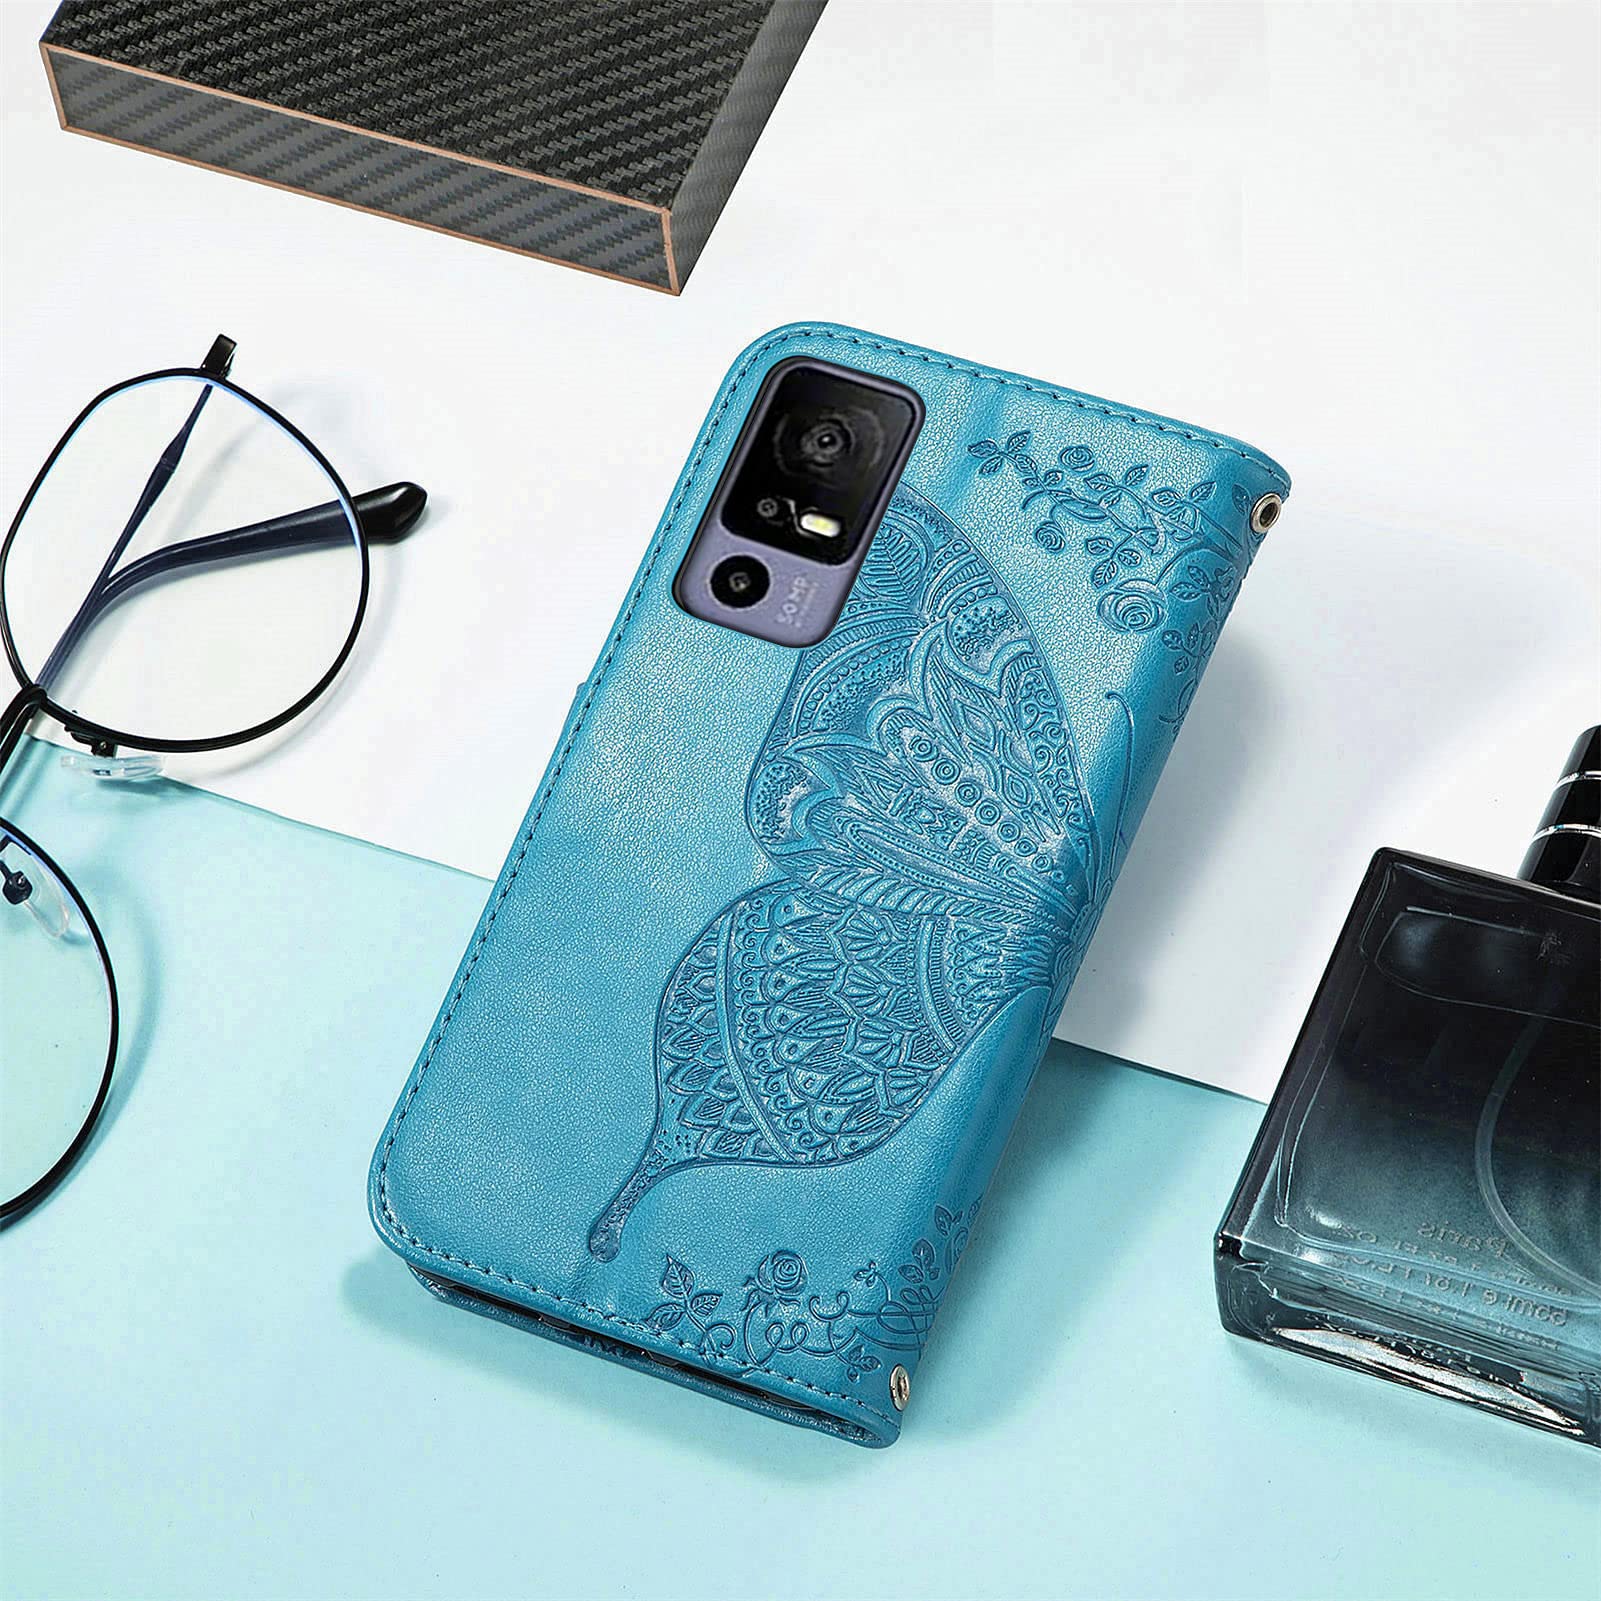 Ranyi for Lively Jitterbug Smart4 Case, Jitterbug Smart 4 Case, Butterfly Pattern Magnetic Wallet Case with Credit Card Holder Kickstand Flip Folio Leather Wallet Case for Jitterbug Smart4 -blue